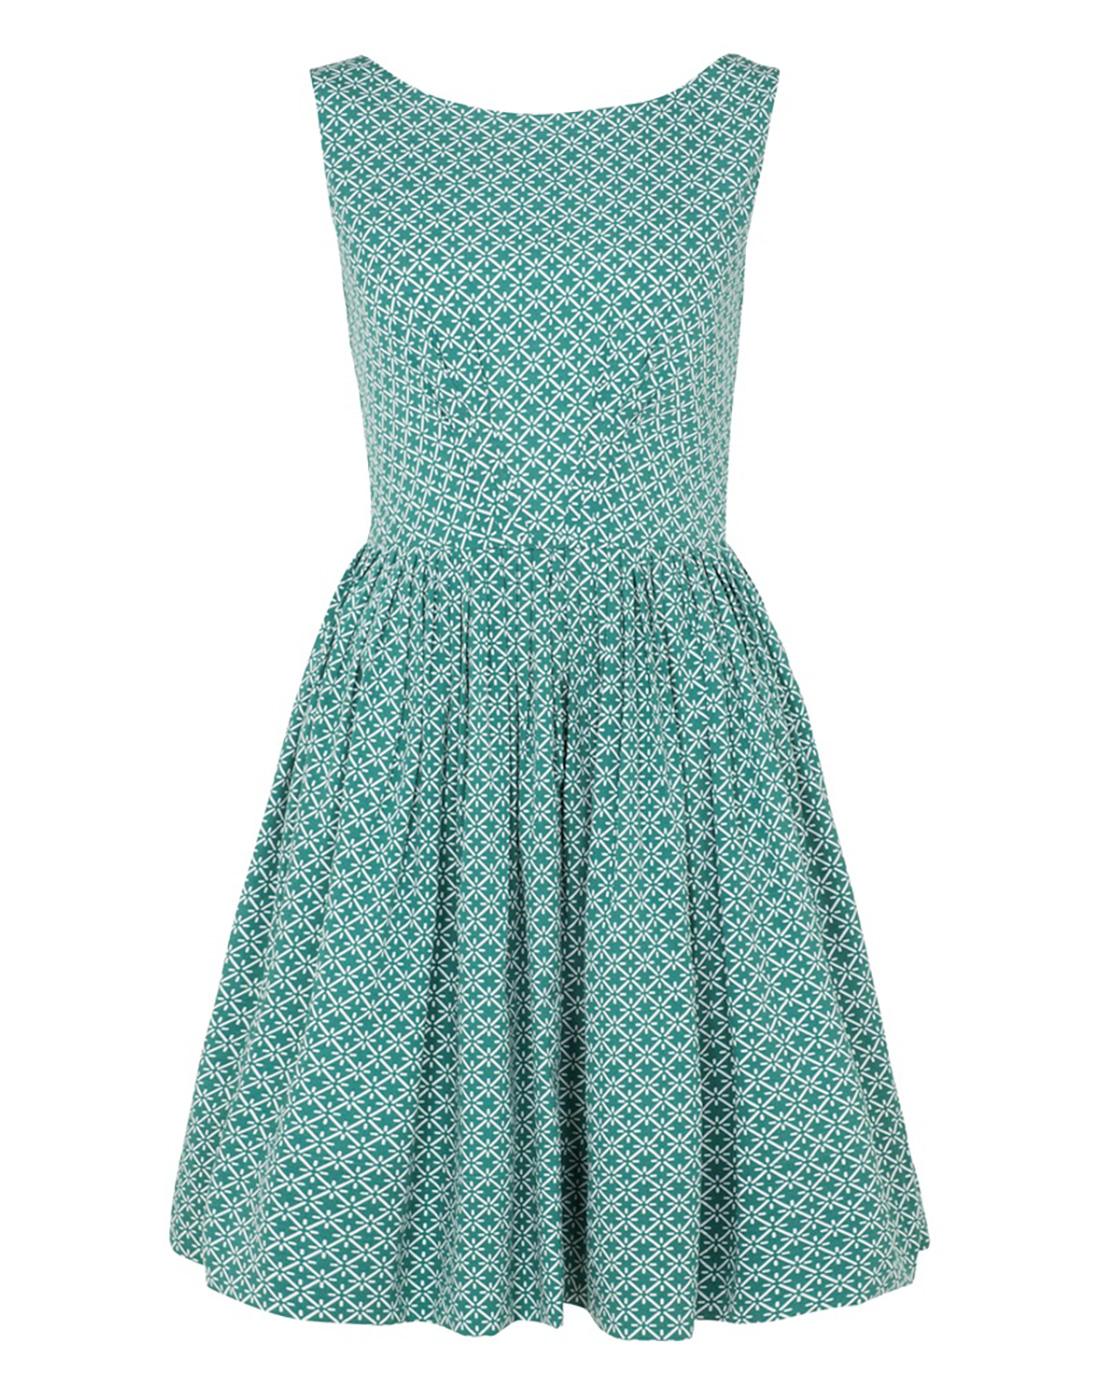 EMILY AND FIN Abigail Retro 50s Mosaic Print Dress in Mint